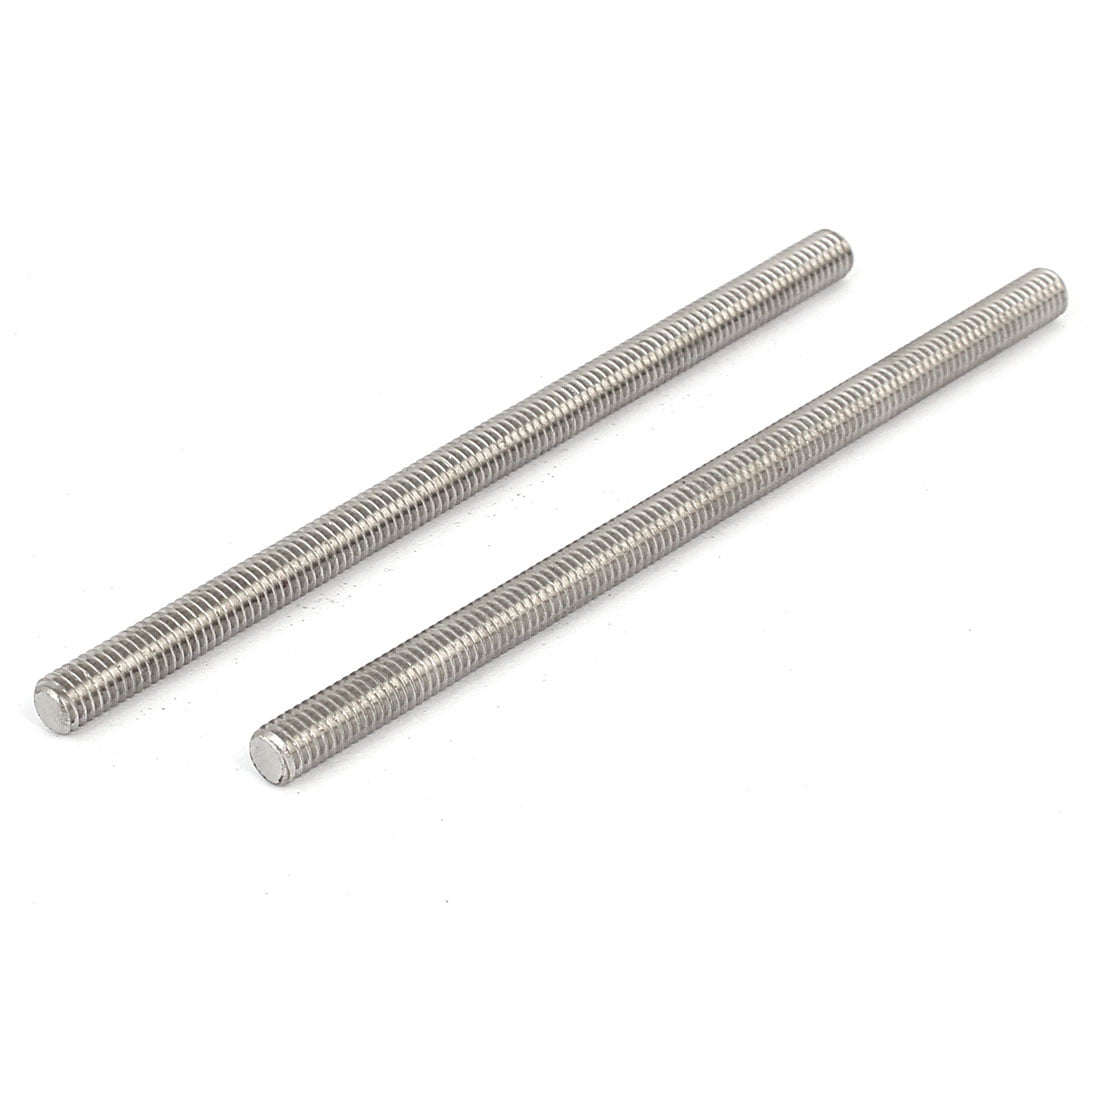 M5 x 110mm 304 Stainless Steel Fully Threaded Rod Bar Studs Silver Tone 5 Pcs